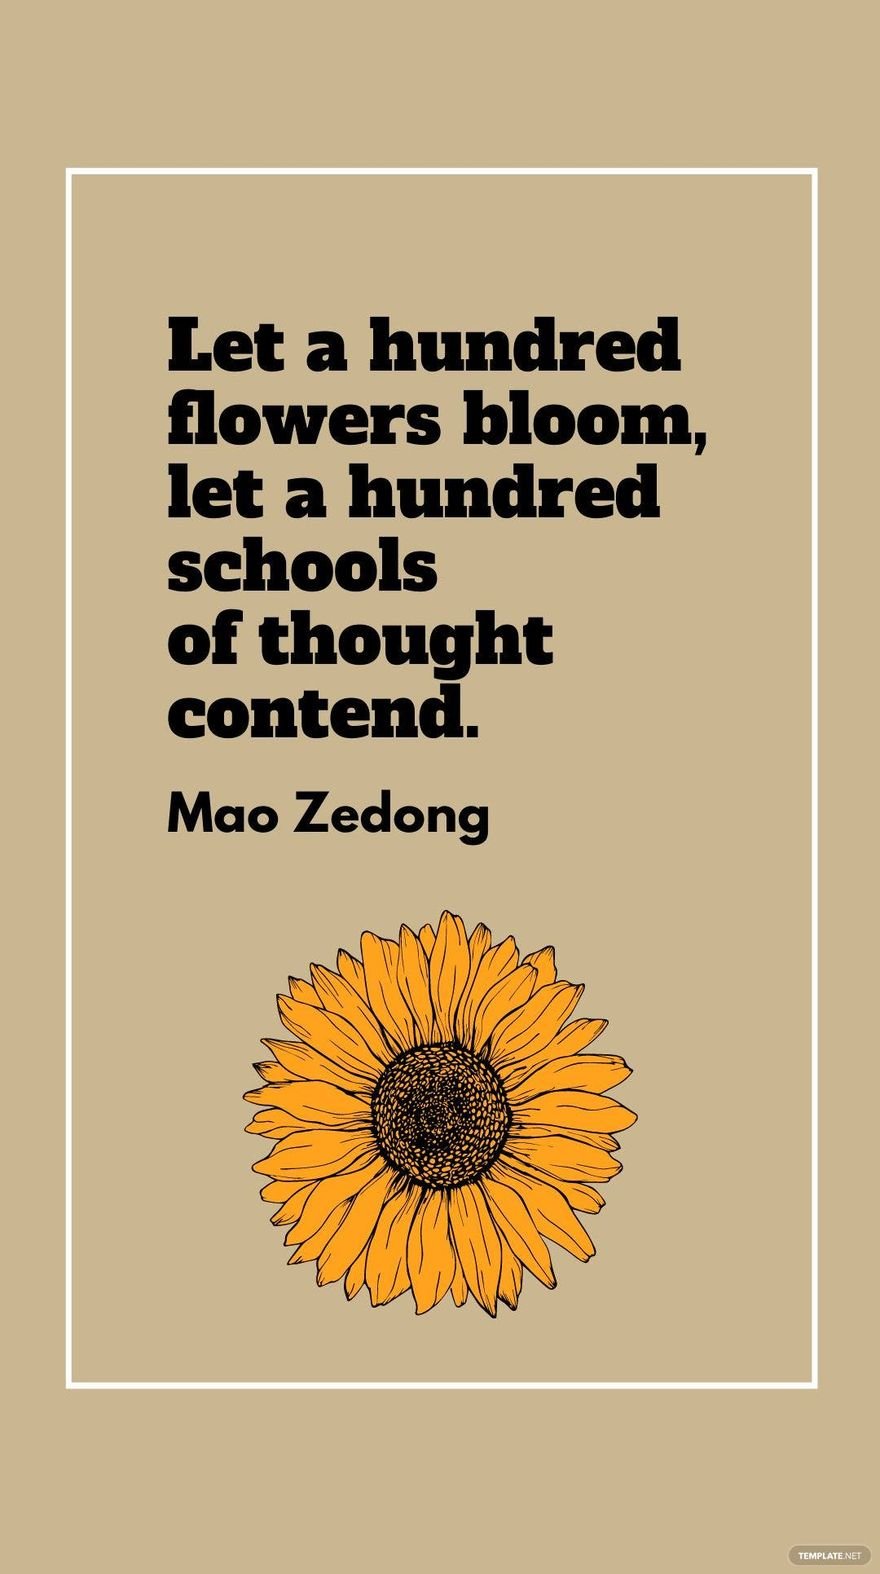 Mao Zedong - Let a hundred flowers bloom, let a hundred schools of thought contend.